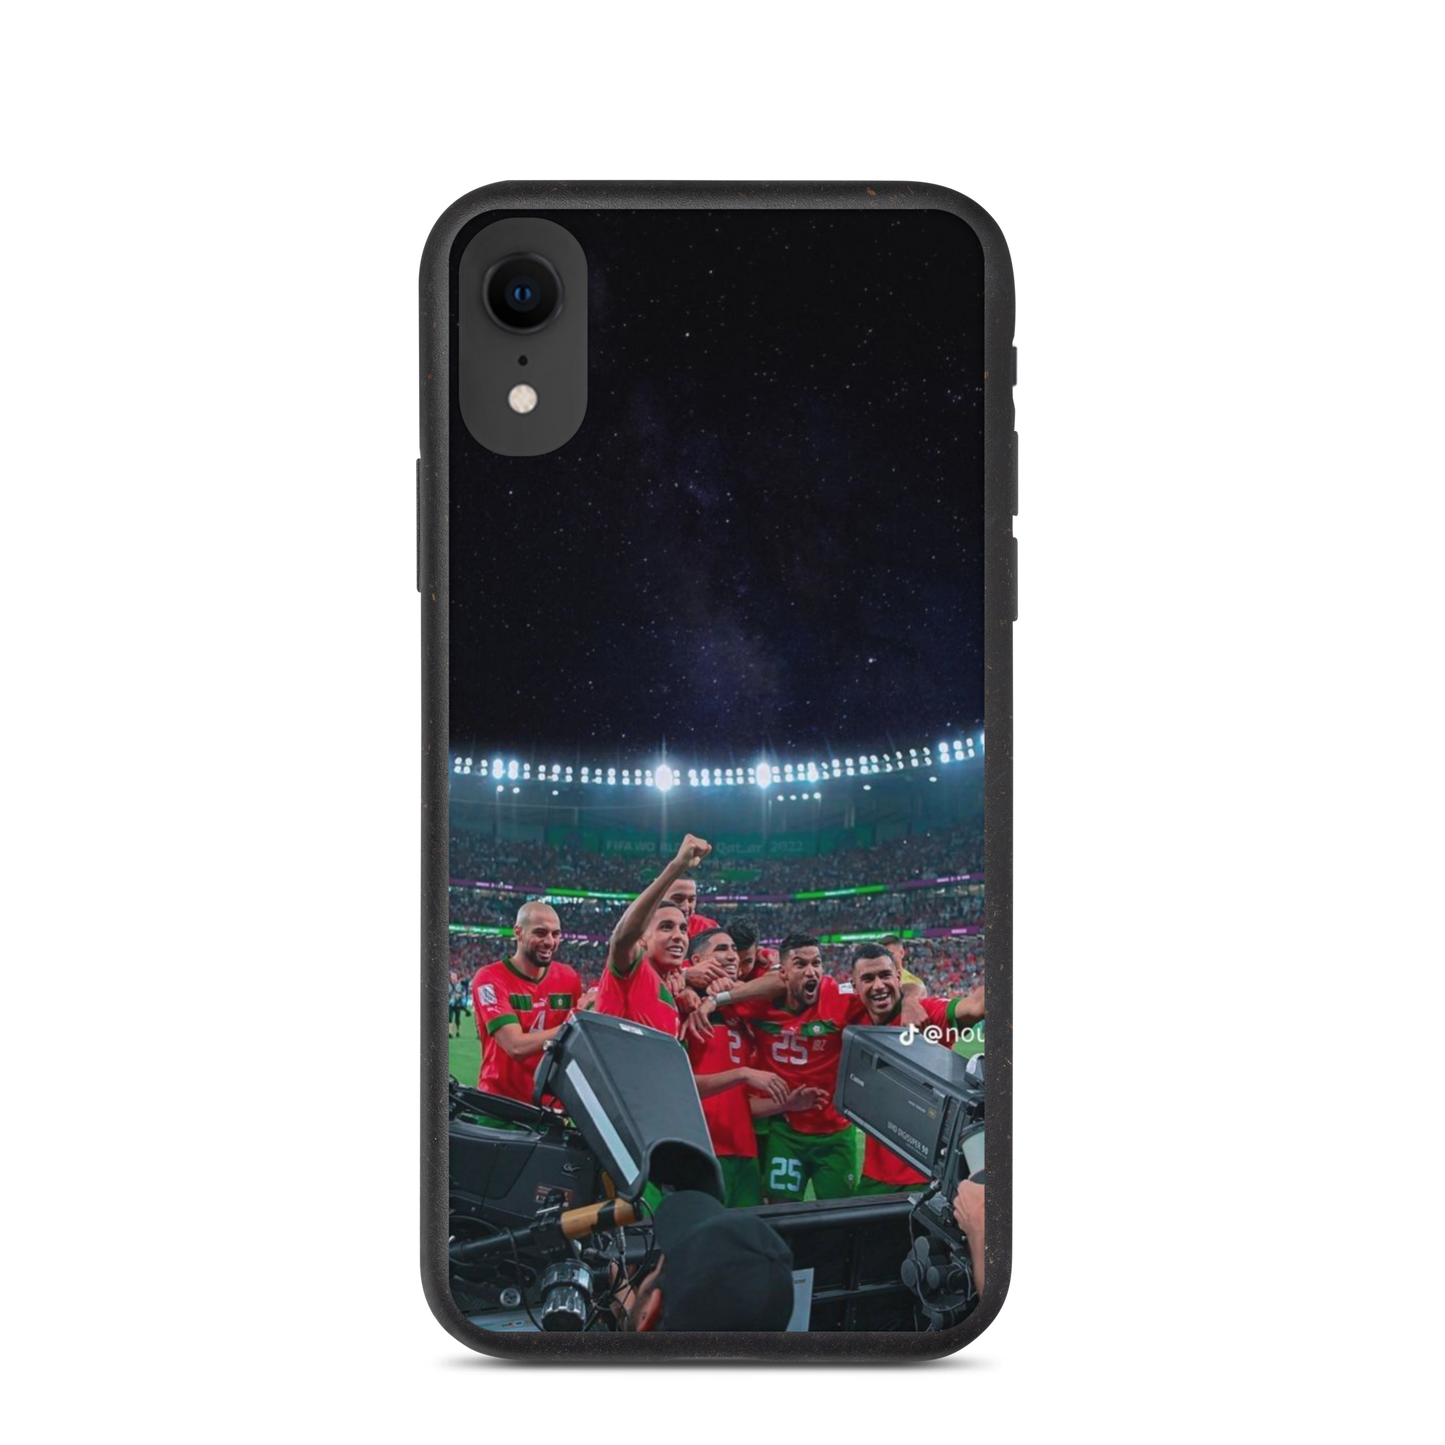 Moroccan football team in Qatar Worldcup | iPhone case